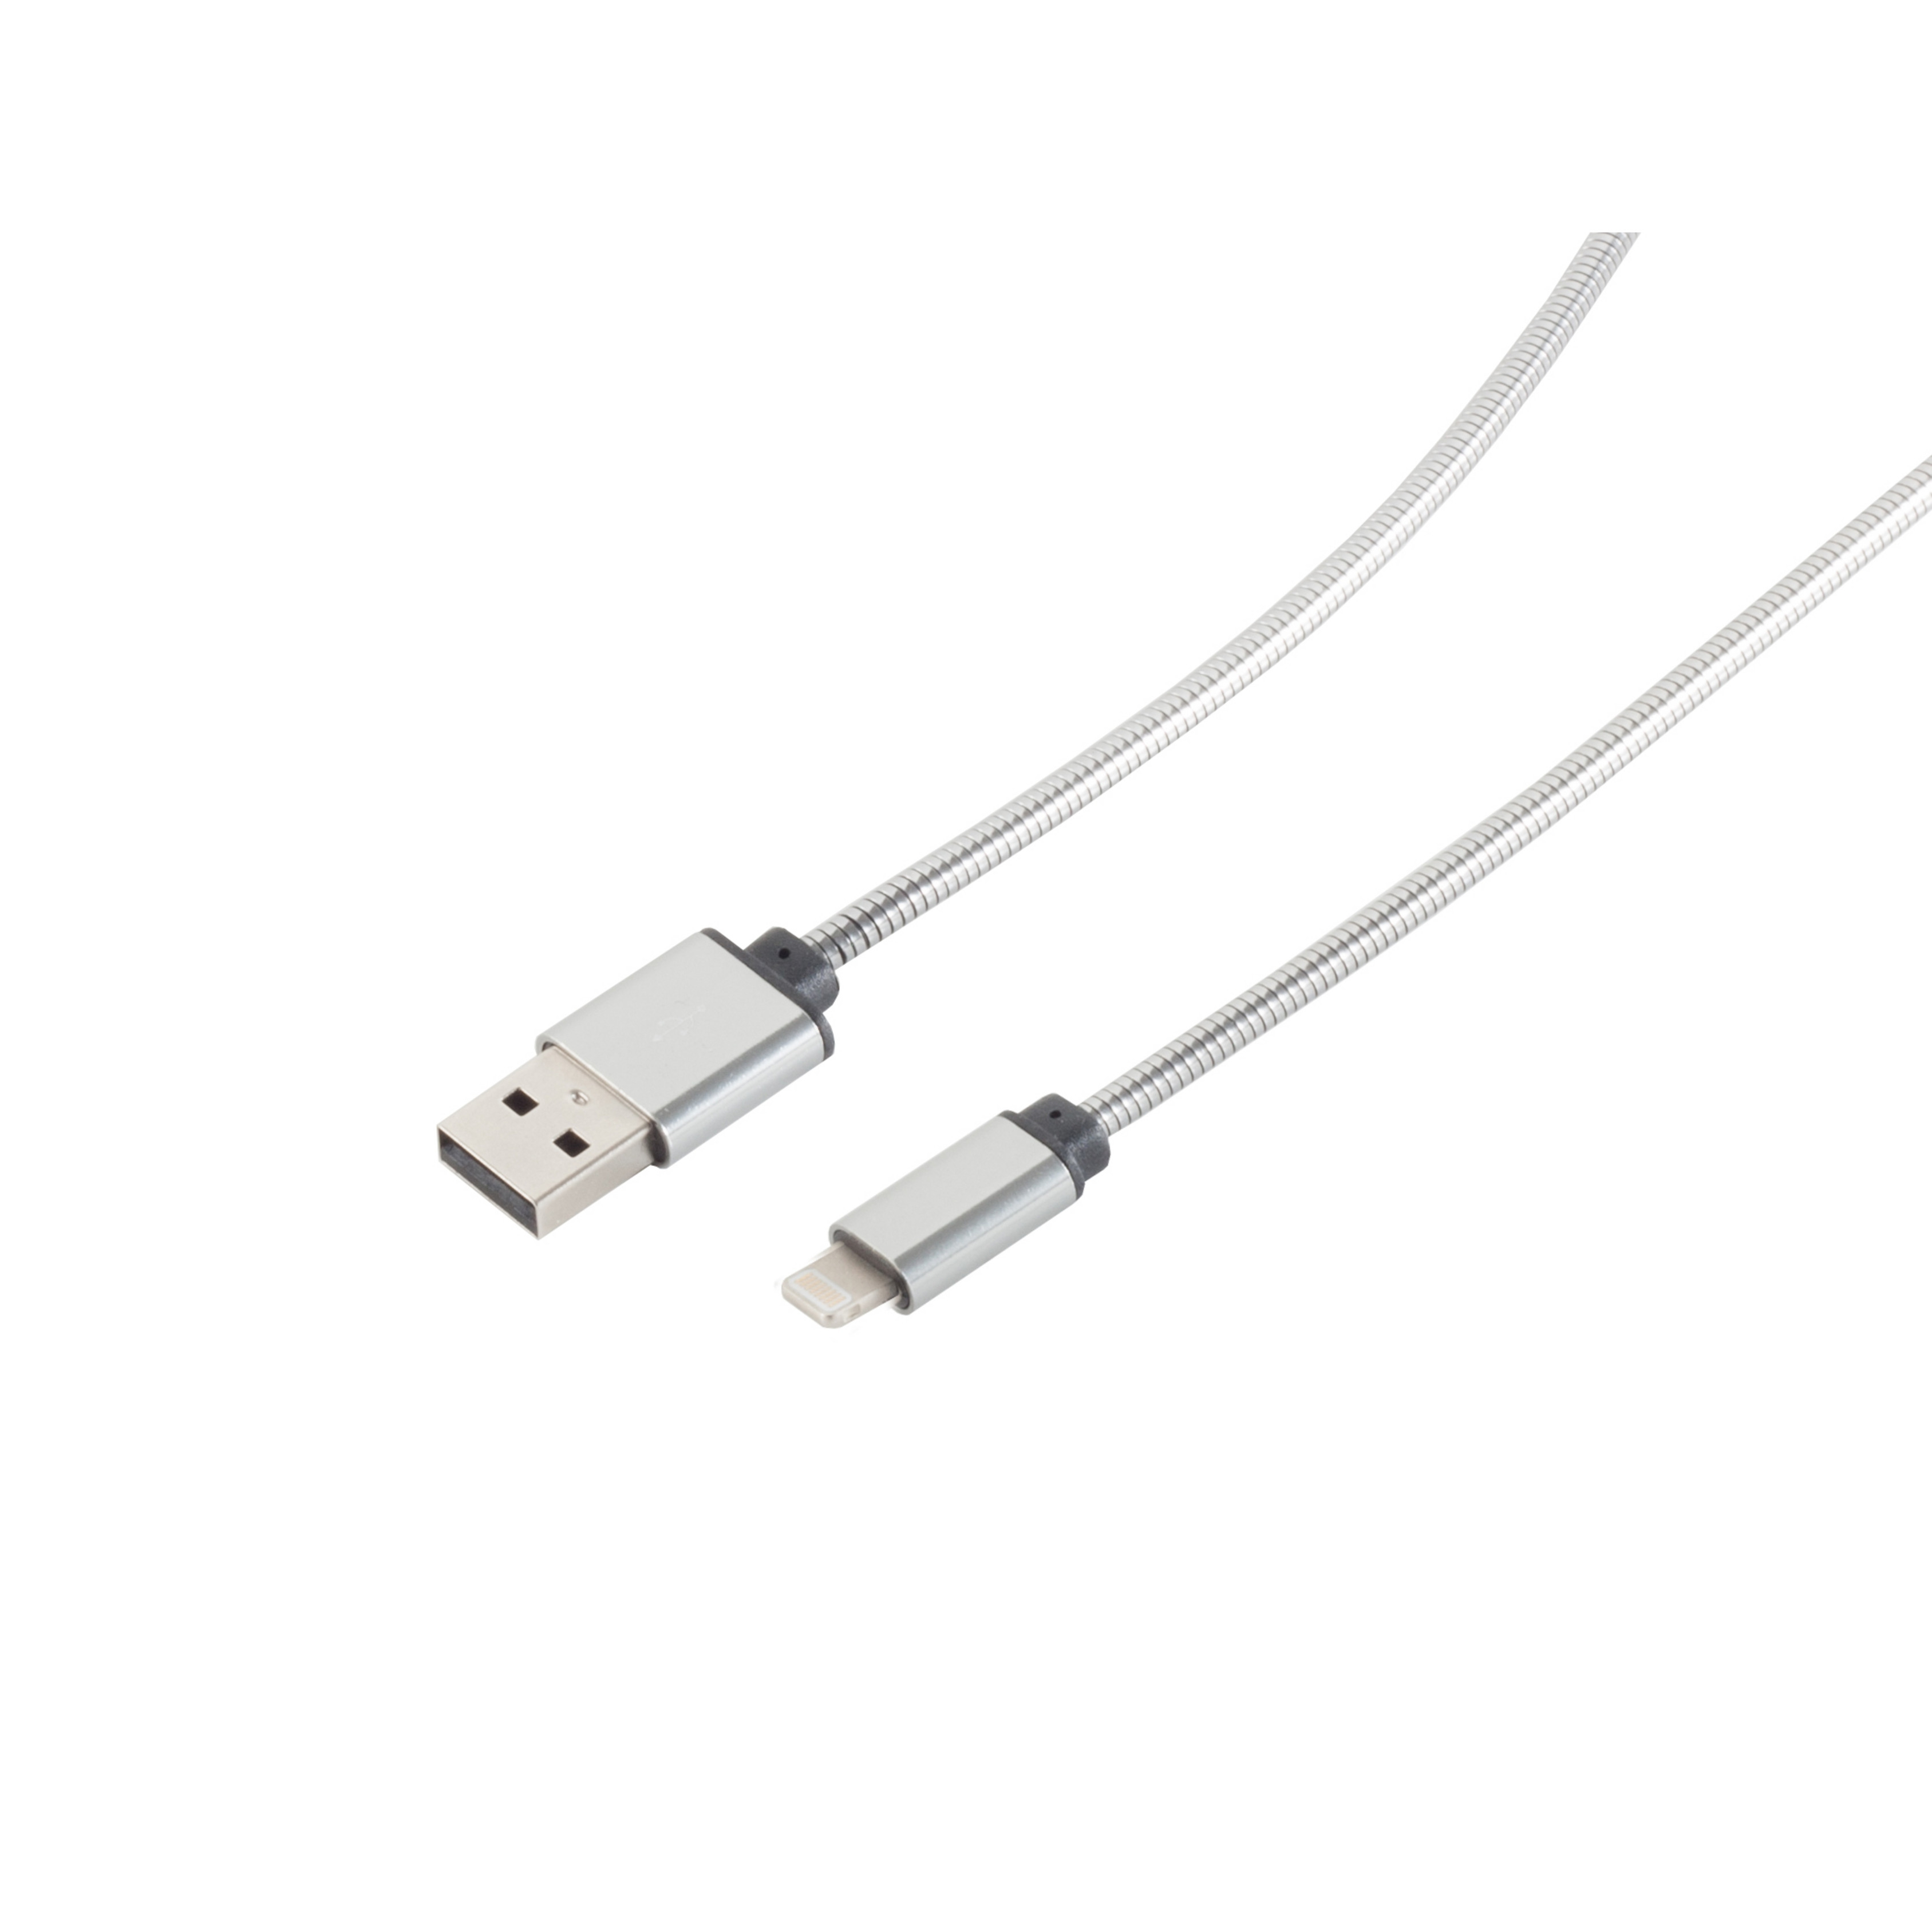 Lade-Sync CONNECTIVITY USB Kabel 1,6m USB Steel S/CONN A/ Kabel MAXIMUM Silber USB 8-pin